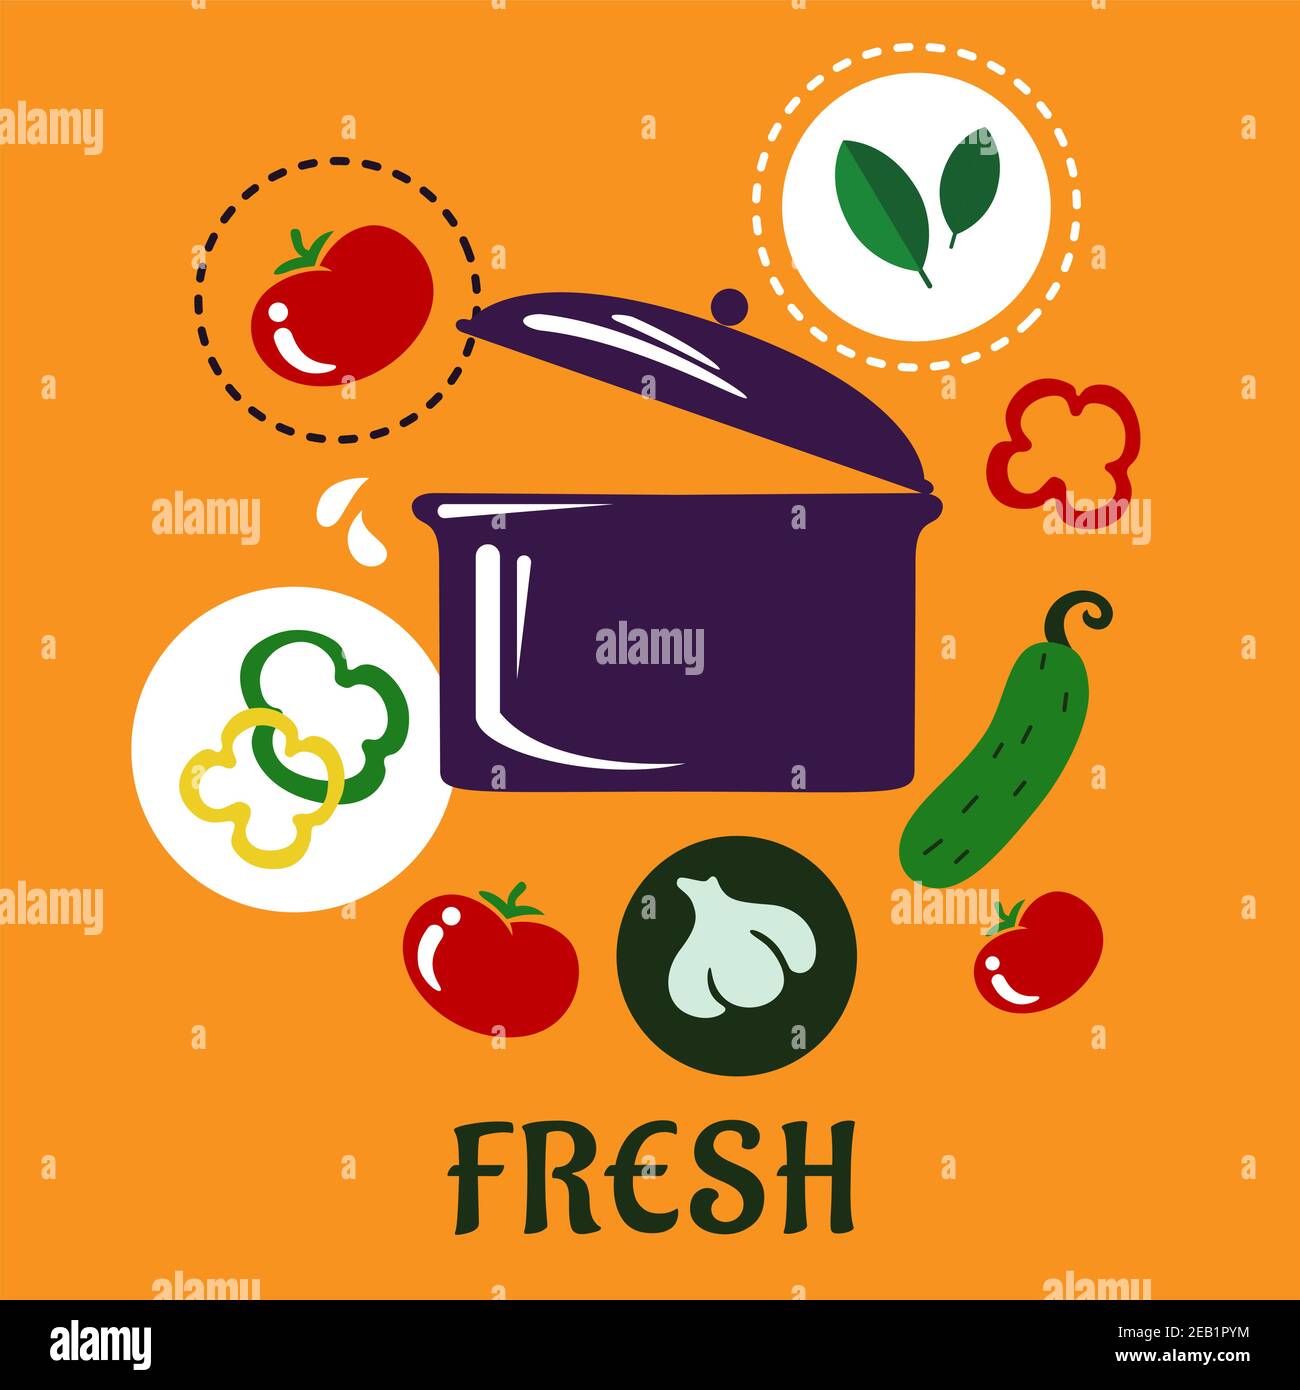 Fresh healthy food cooking flat concept depicting pan with pictograms of whole tomatoes, garlic, cucumber, yellow and green bell pepper slices and spi Stock Vector